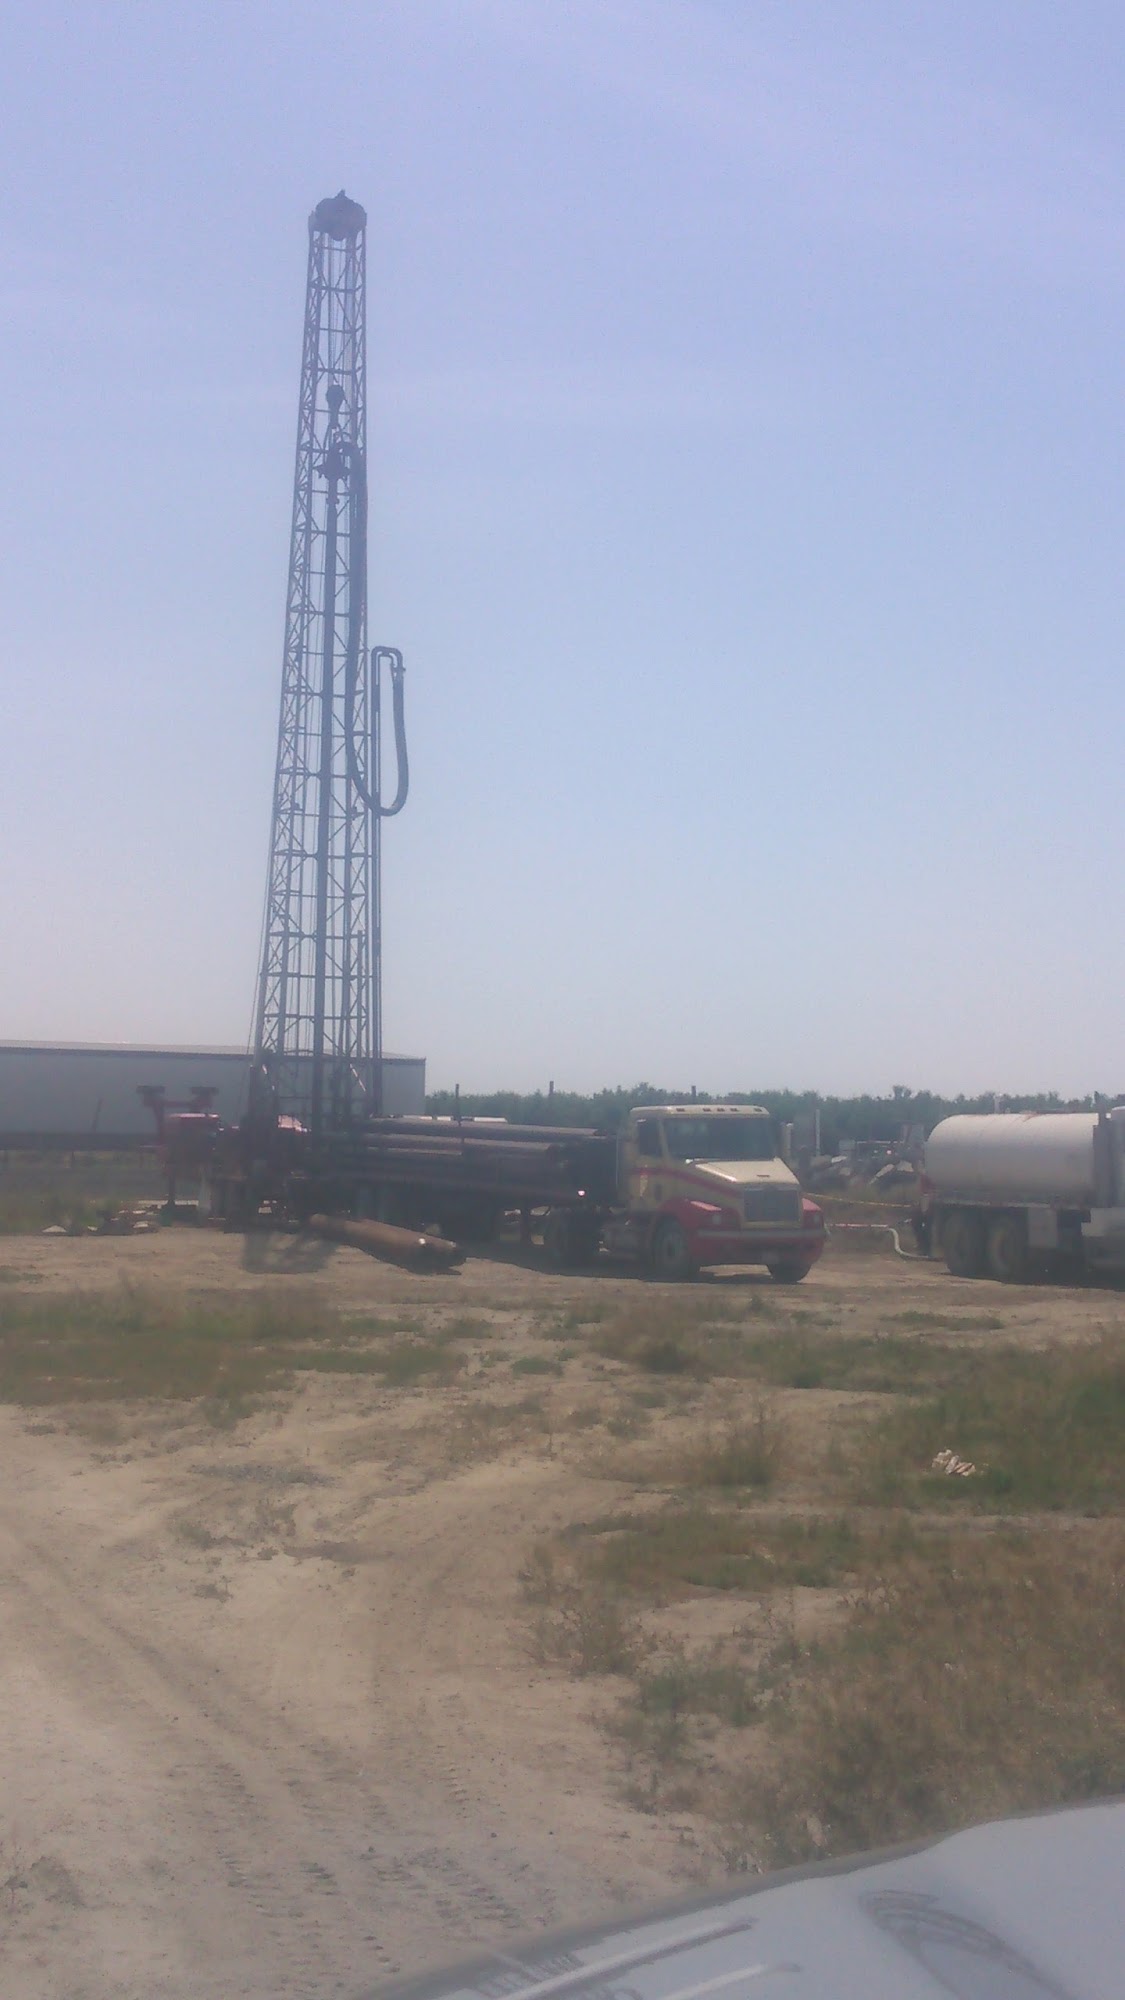 A-1 Drilling and Pump 1218 S Mirage Ave, Lindsay California 93247